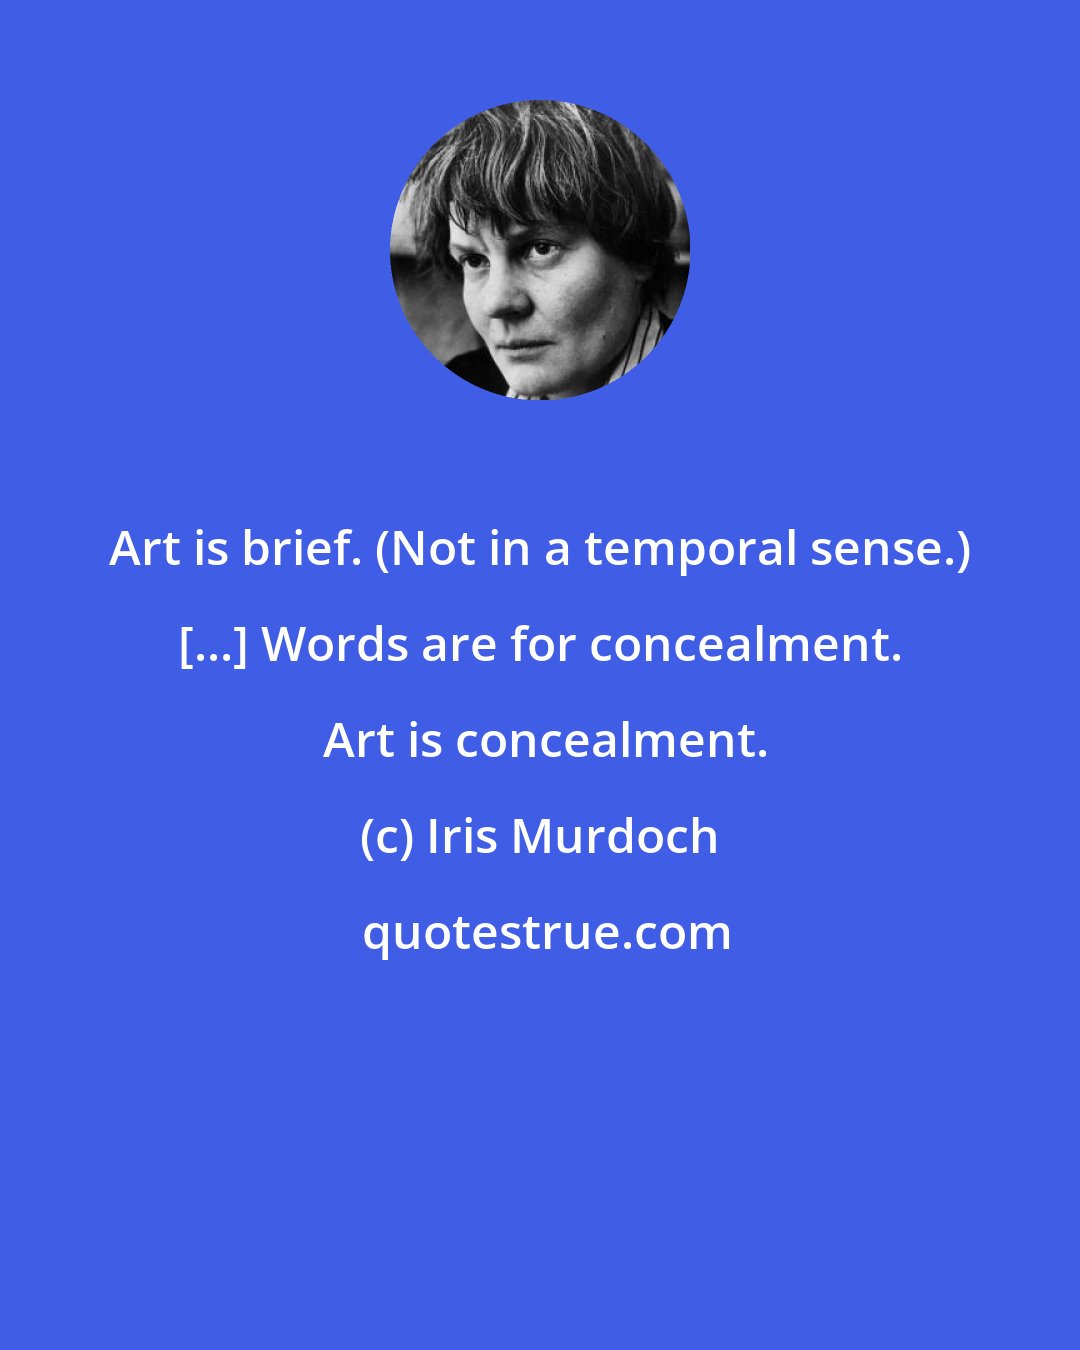 Iris Murdoch: Art is brief. (Not in a temporal sense.) [...] Words are for concealment.  Art is concealment.